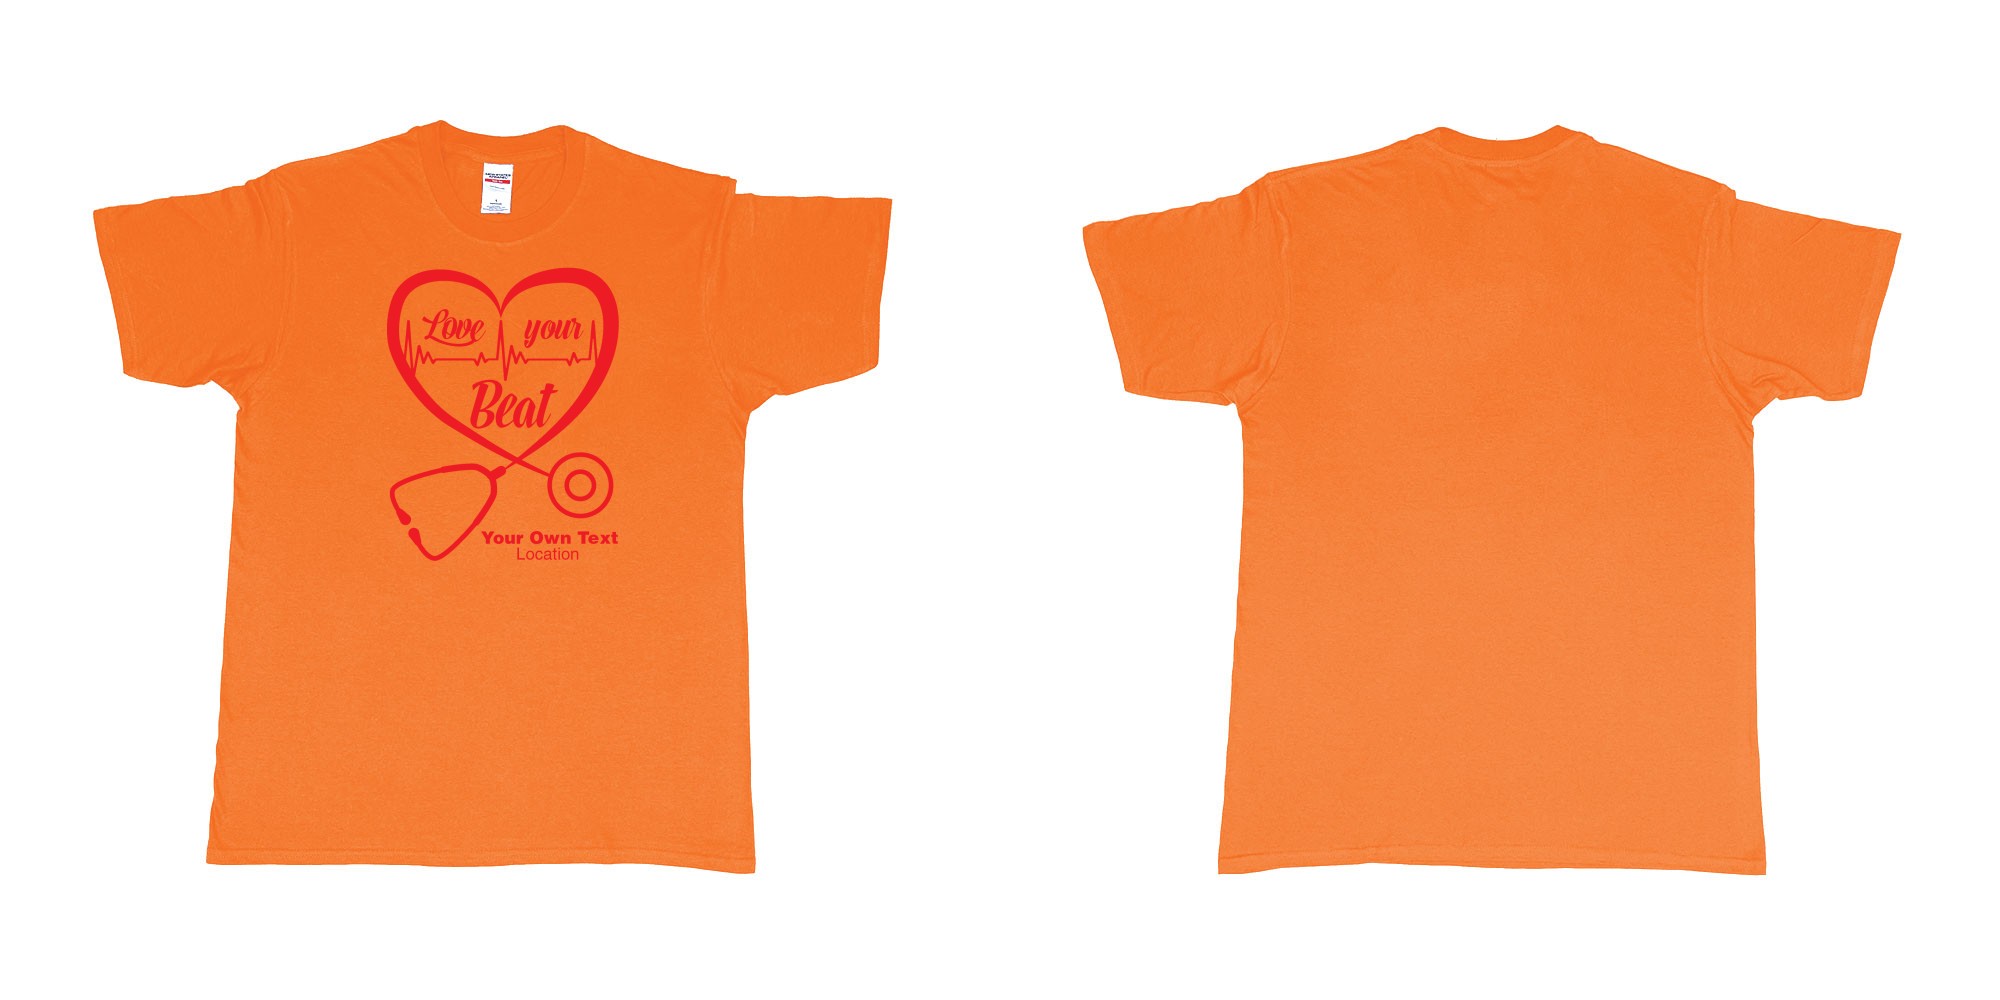 Custom tshirt design stethoscope doctor love your beat hearth custom tshirt print in fabric color orange choice your own text made in Bali by The Pirate Way